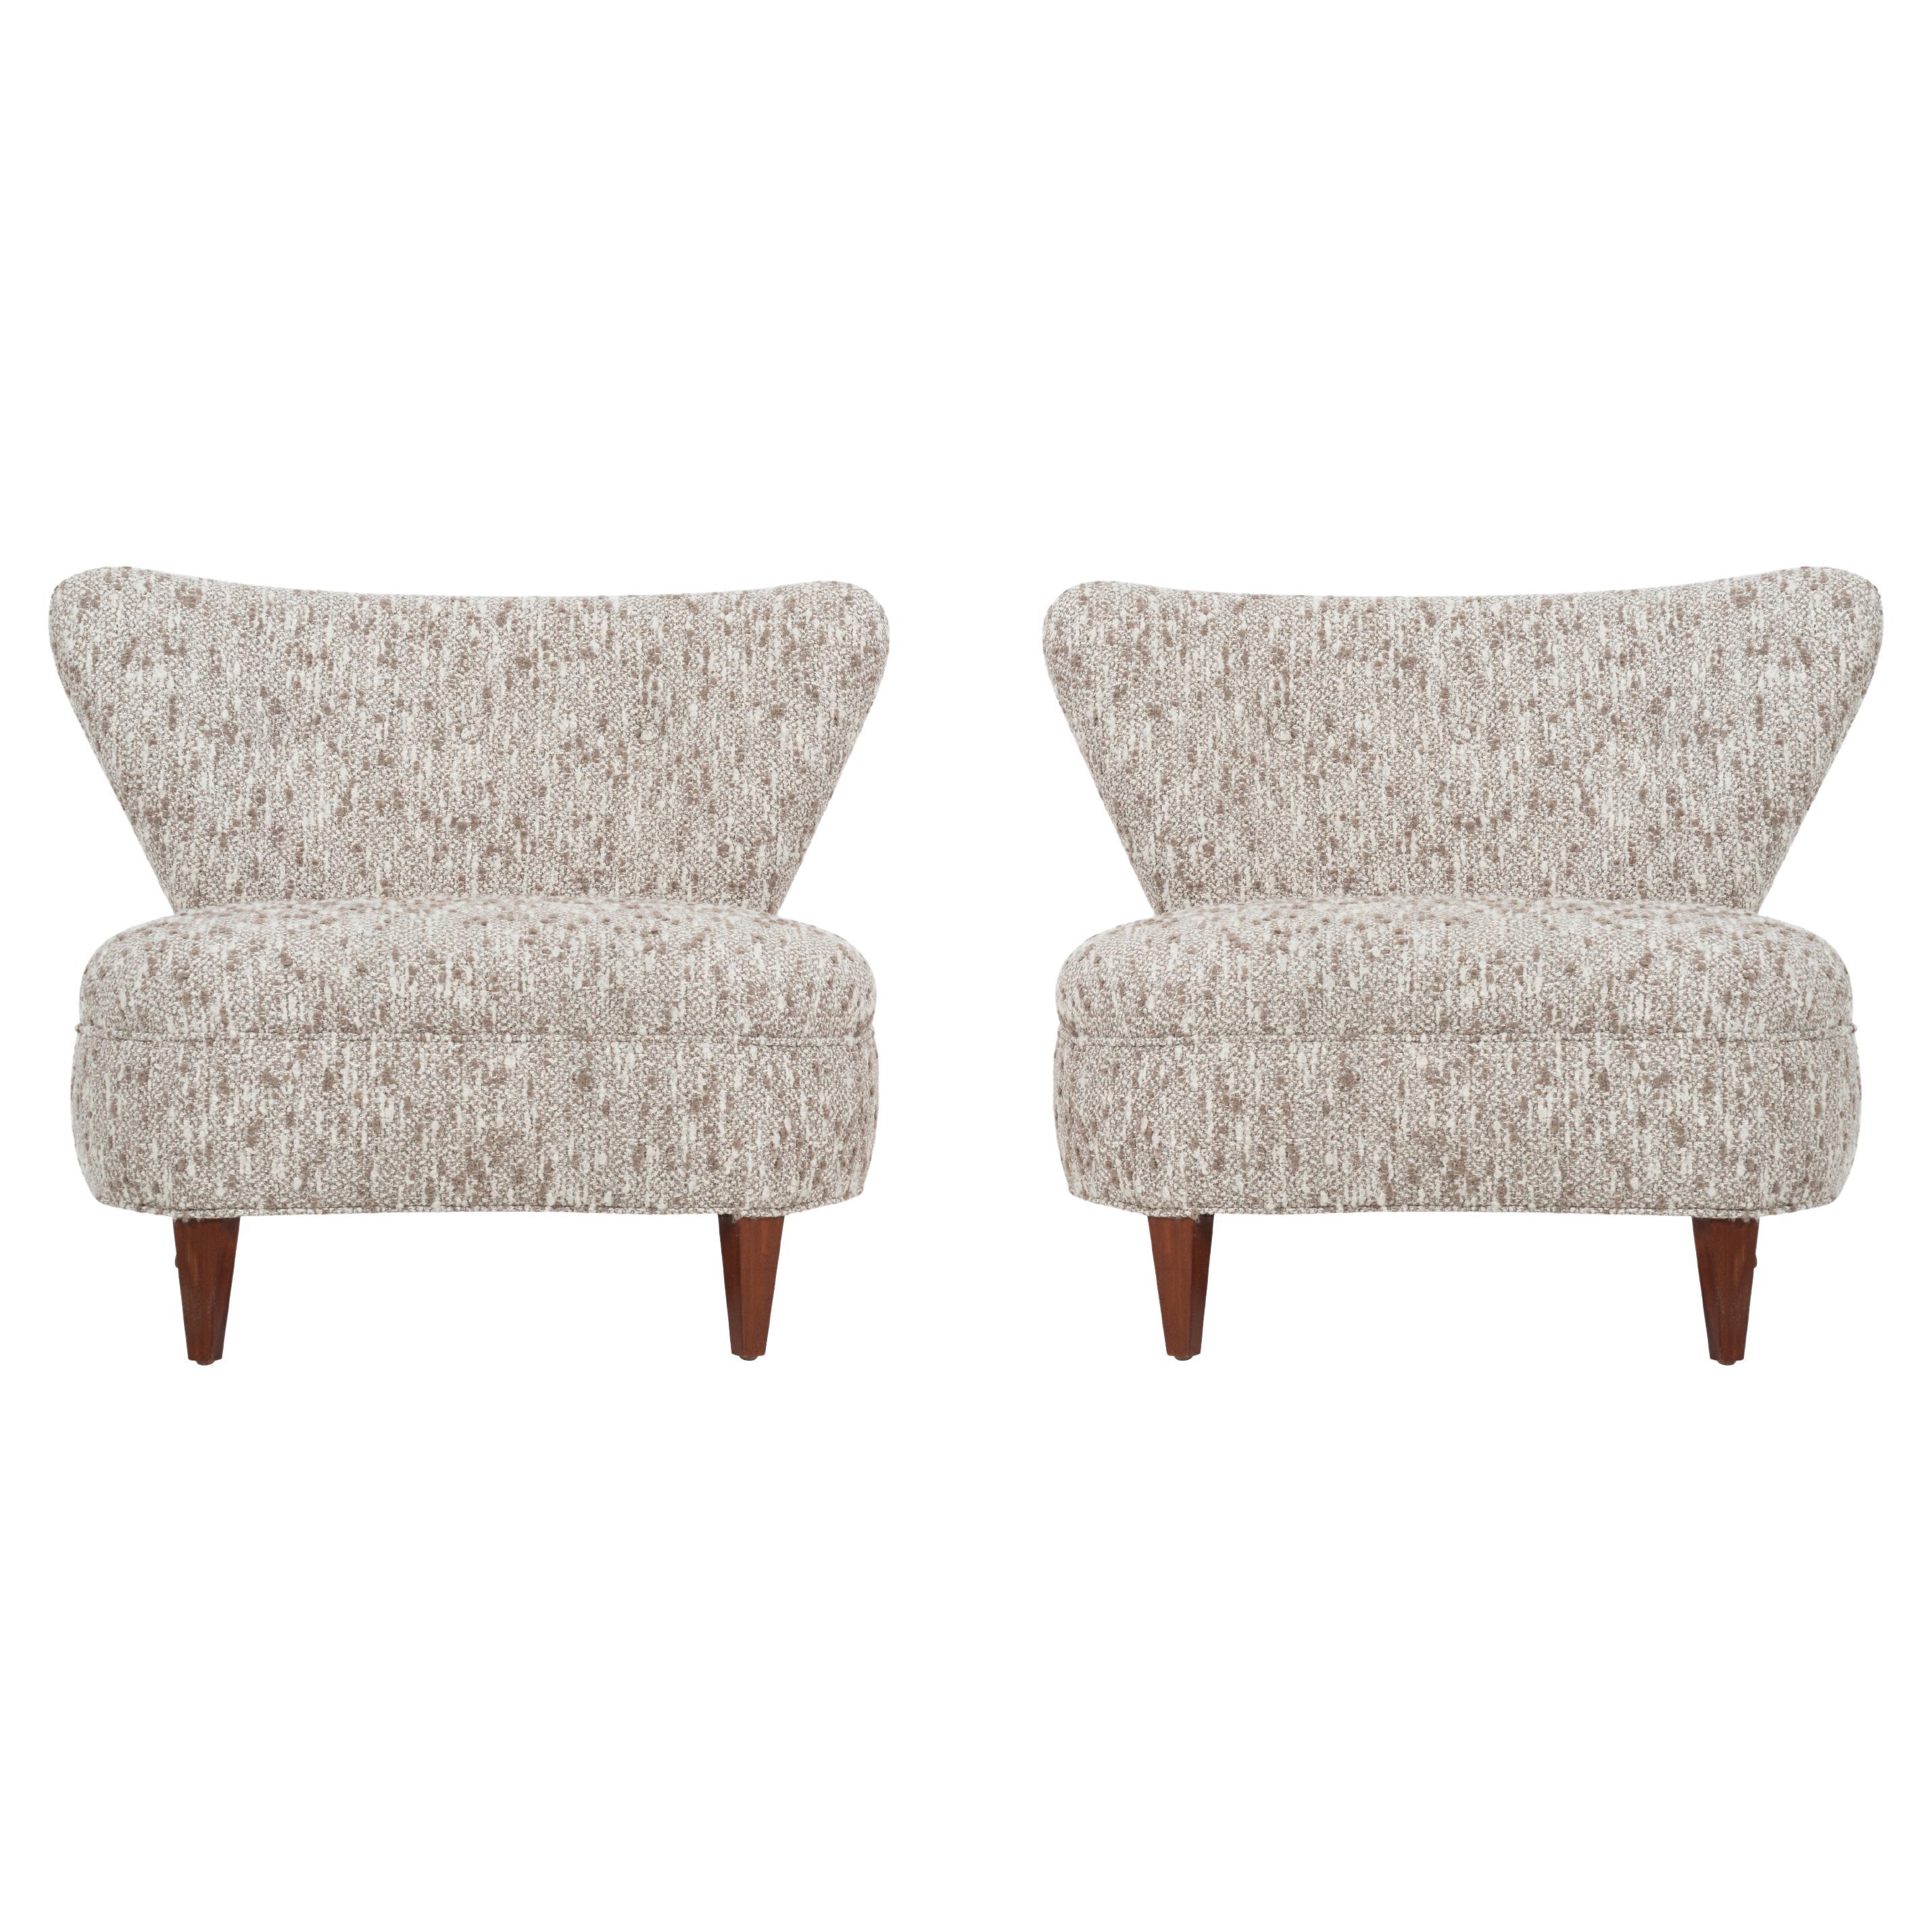 Pair of Mid-Century Lounge Chairs in the Style of Edward Wormley